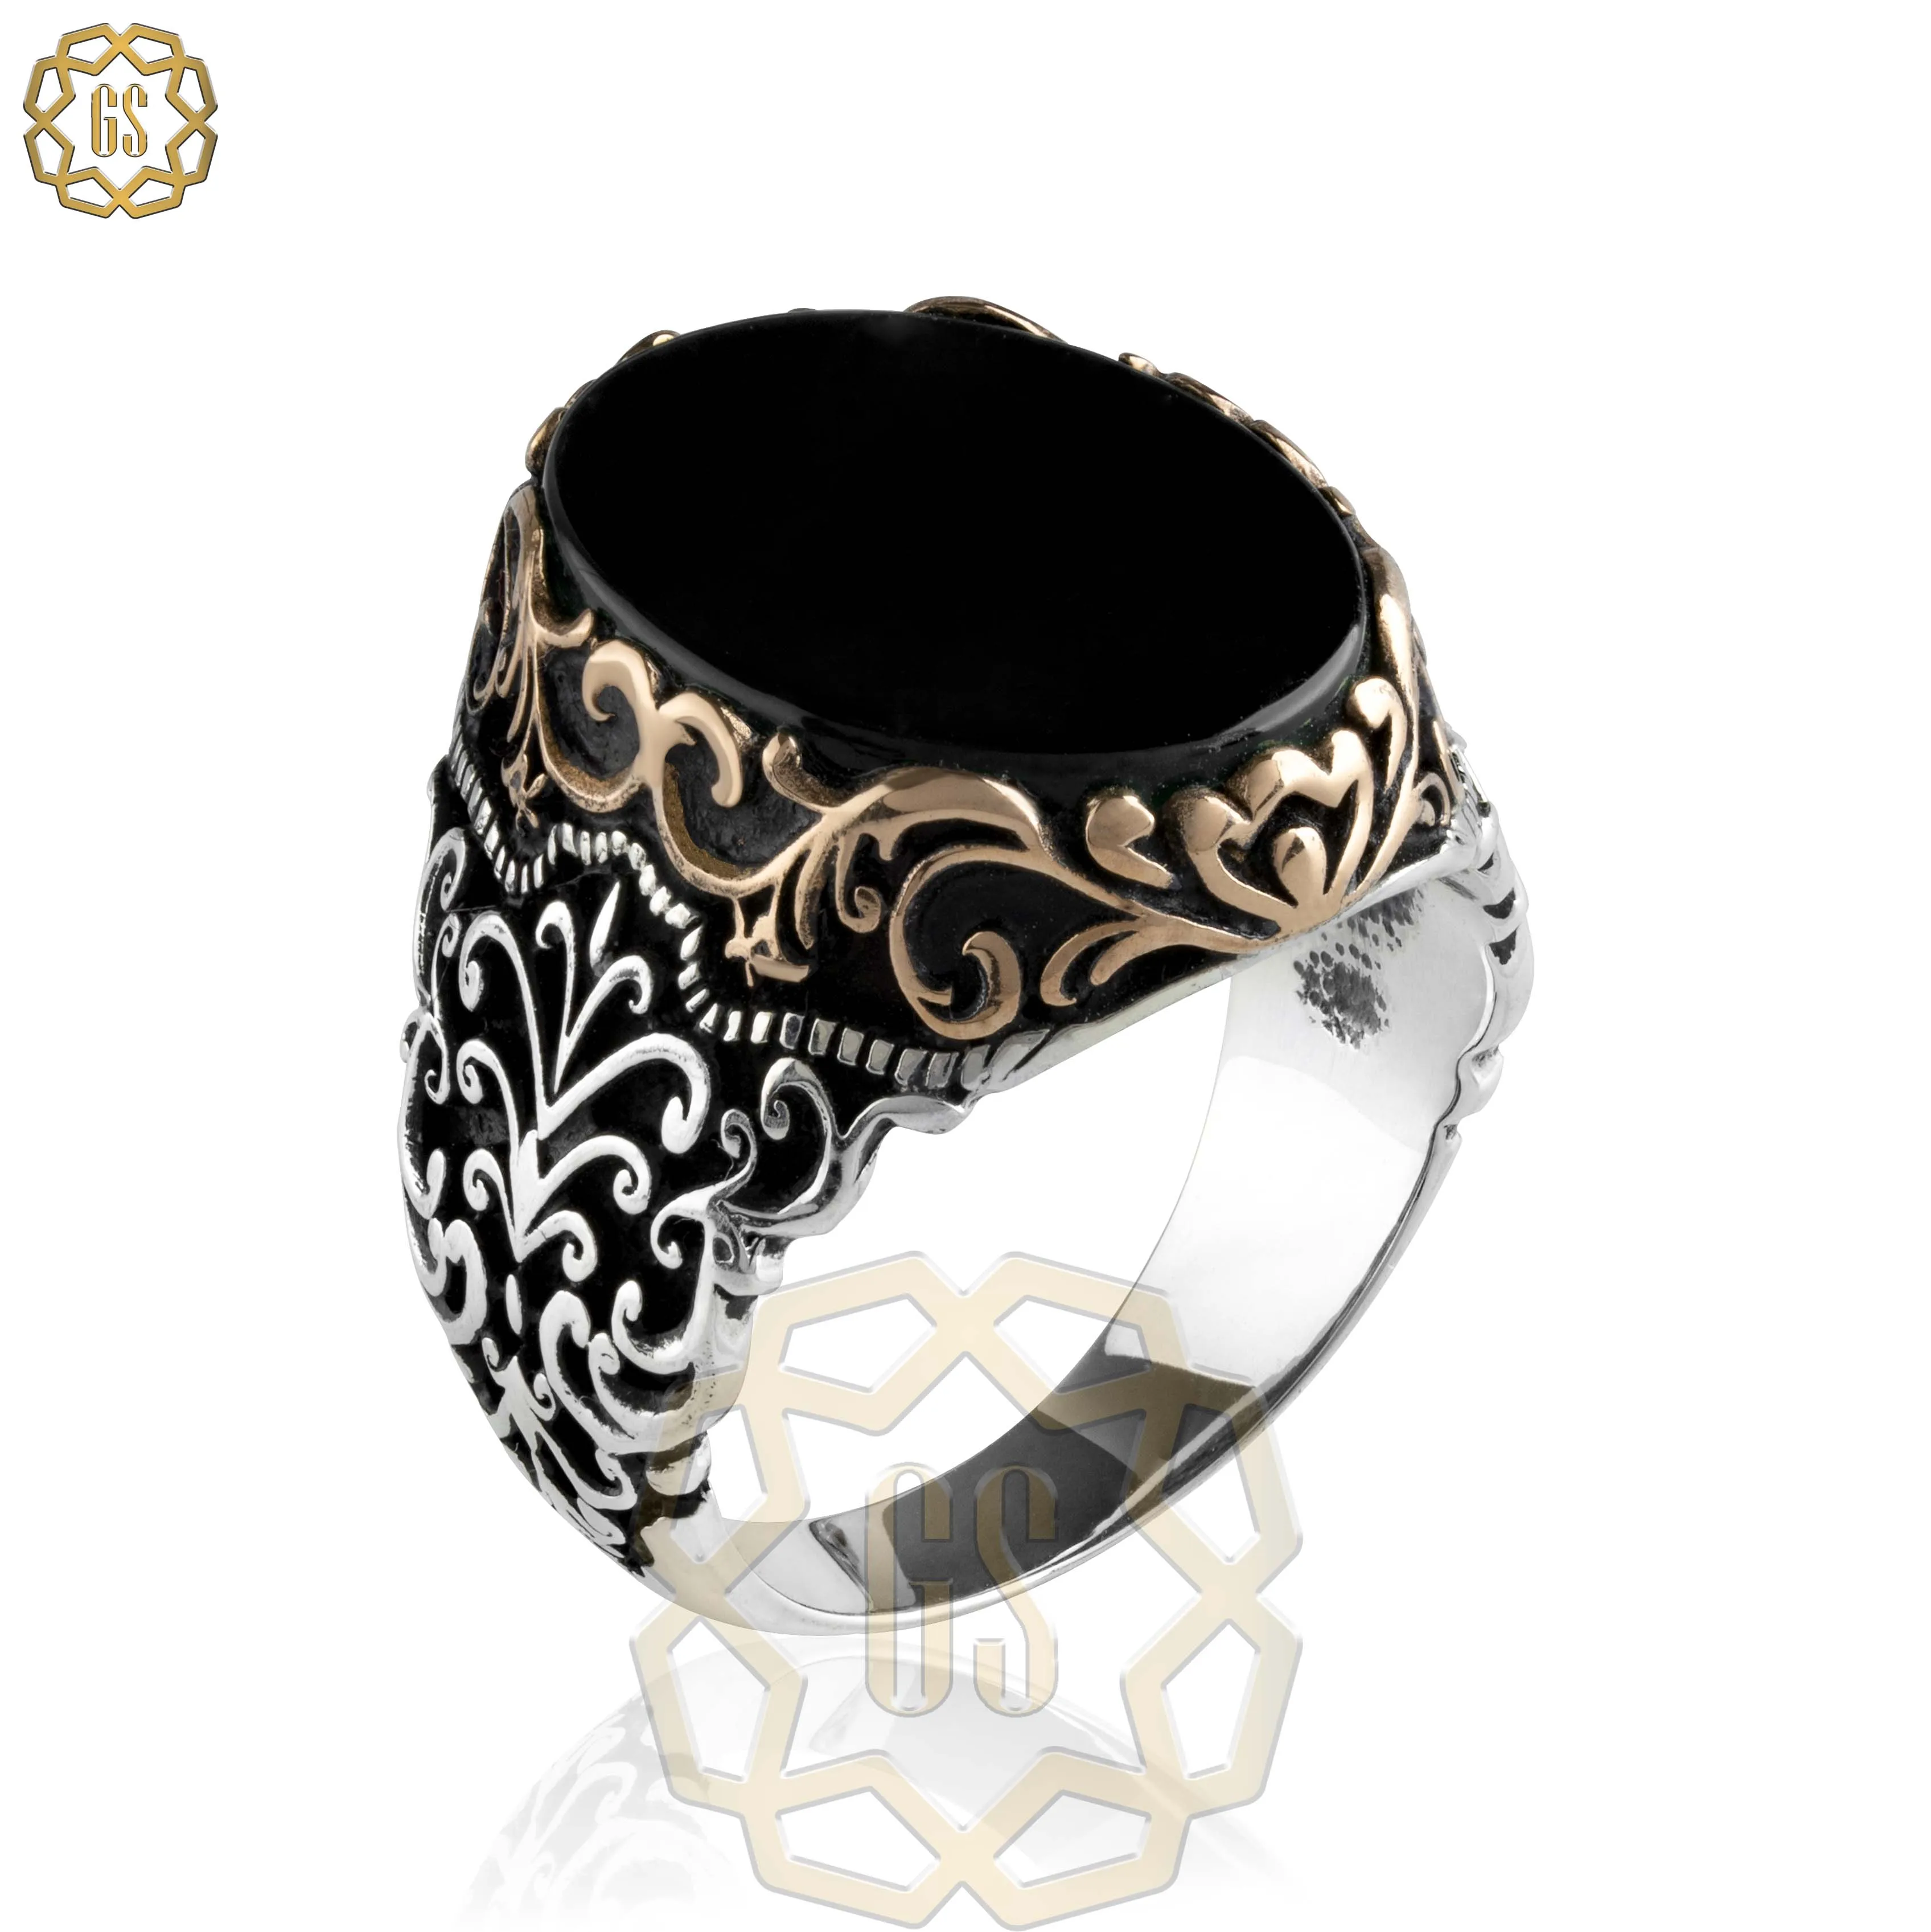 

Silver Ring For Men 925 Made in Turkey With ( Agate , Onyx ) Stone.. Guaranteed High Quality .. Turkish Jewelry